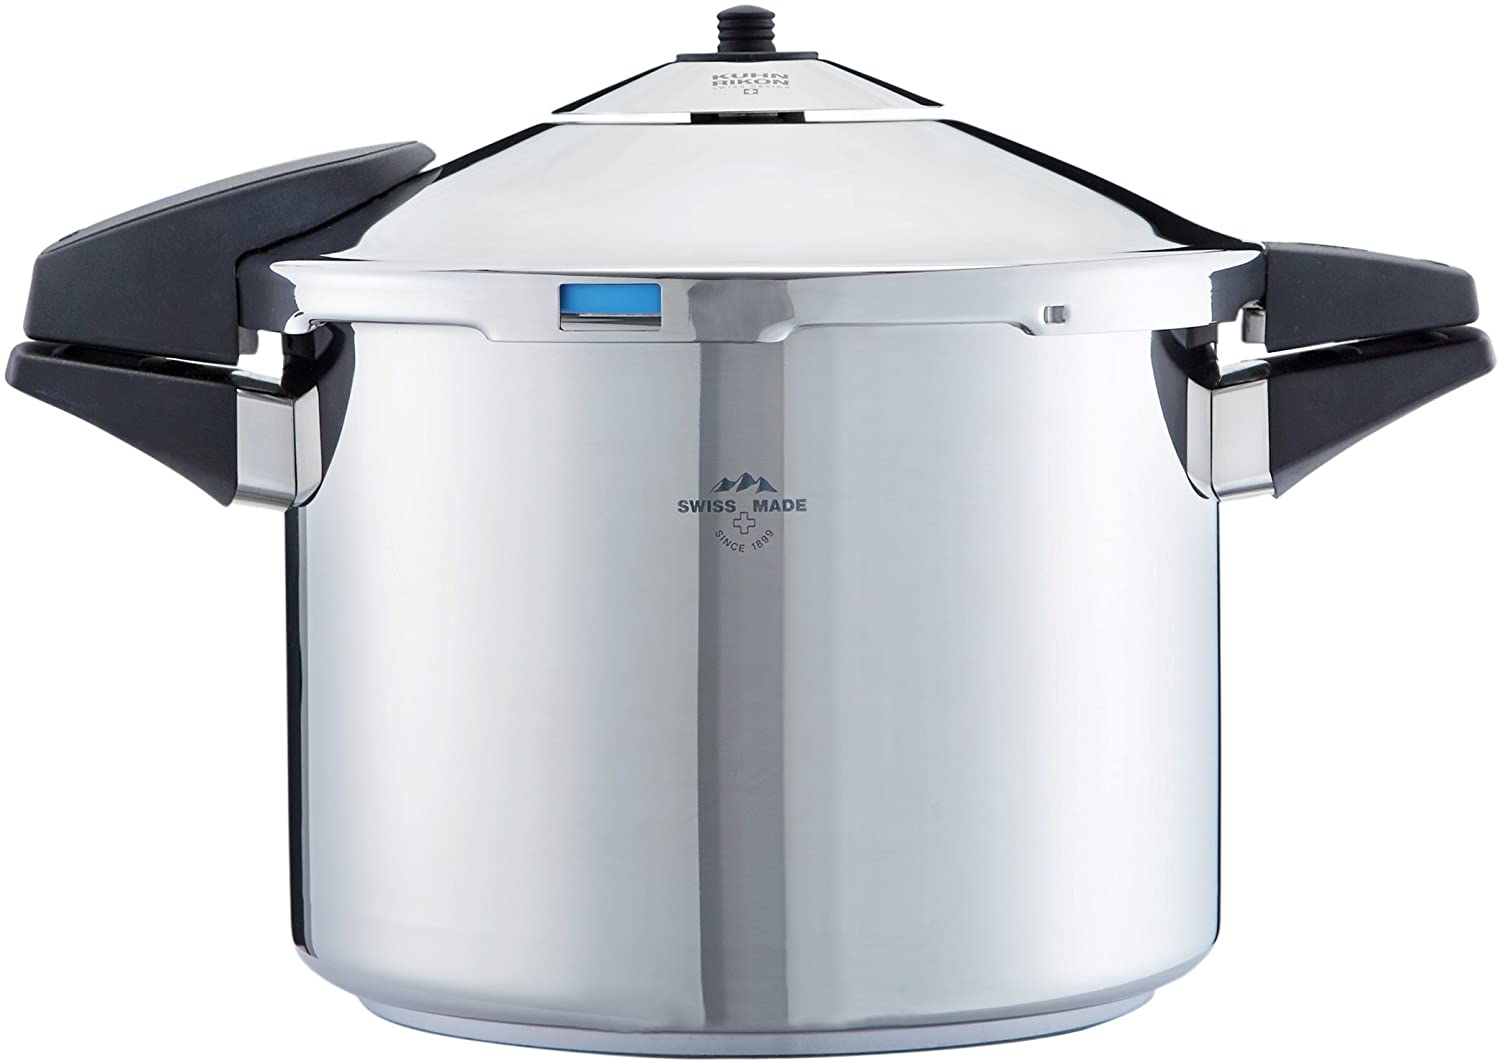 \'Kuhn Rikon Duromatic Comfort 30900 Pressure Cooker, 4 Litre, Stainless Steel, Silver, 35.5 x 24.5 x 19.5 cm